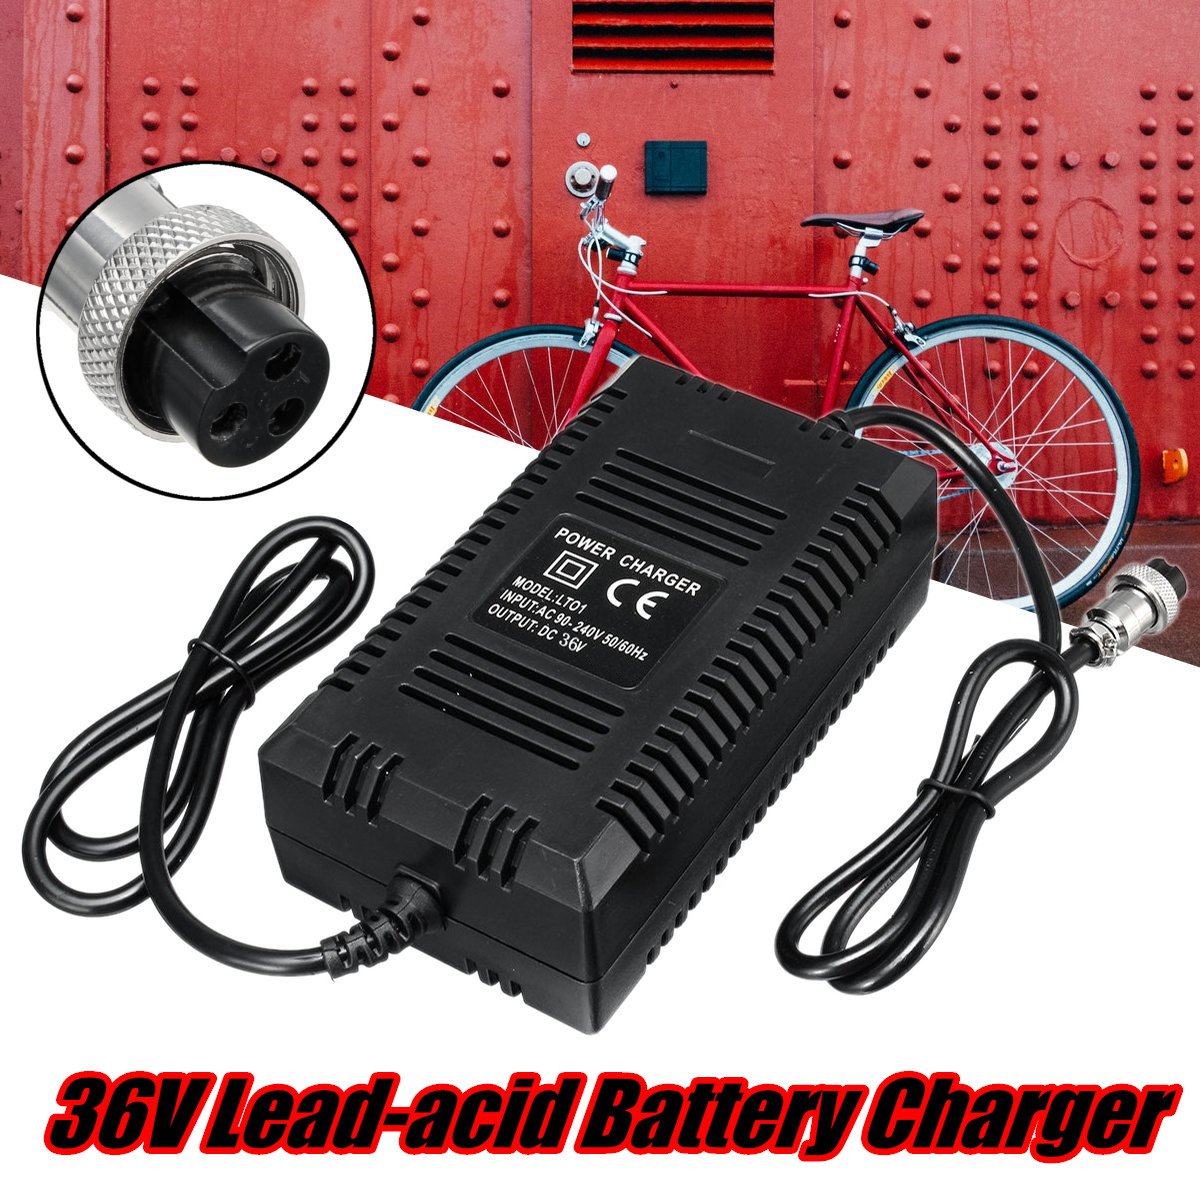 36V-18A-Lead-acid-Battery-Charger-Electric-Car-Vehicle-Scooter-Bicycle-Charger-1375553-1